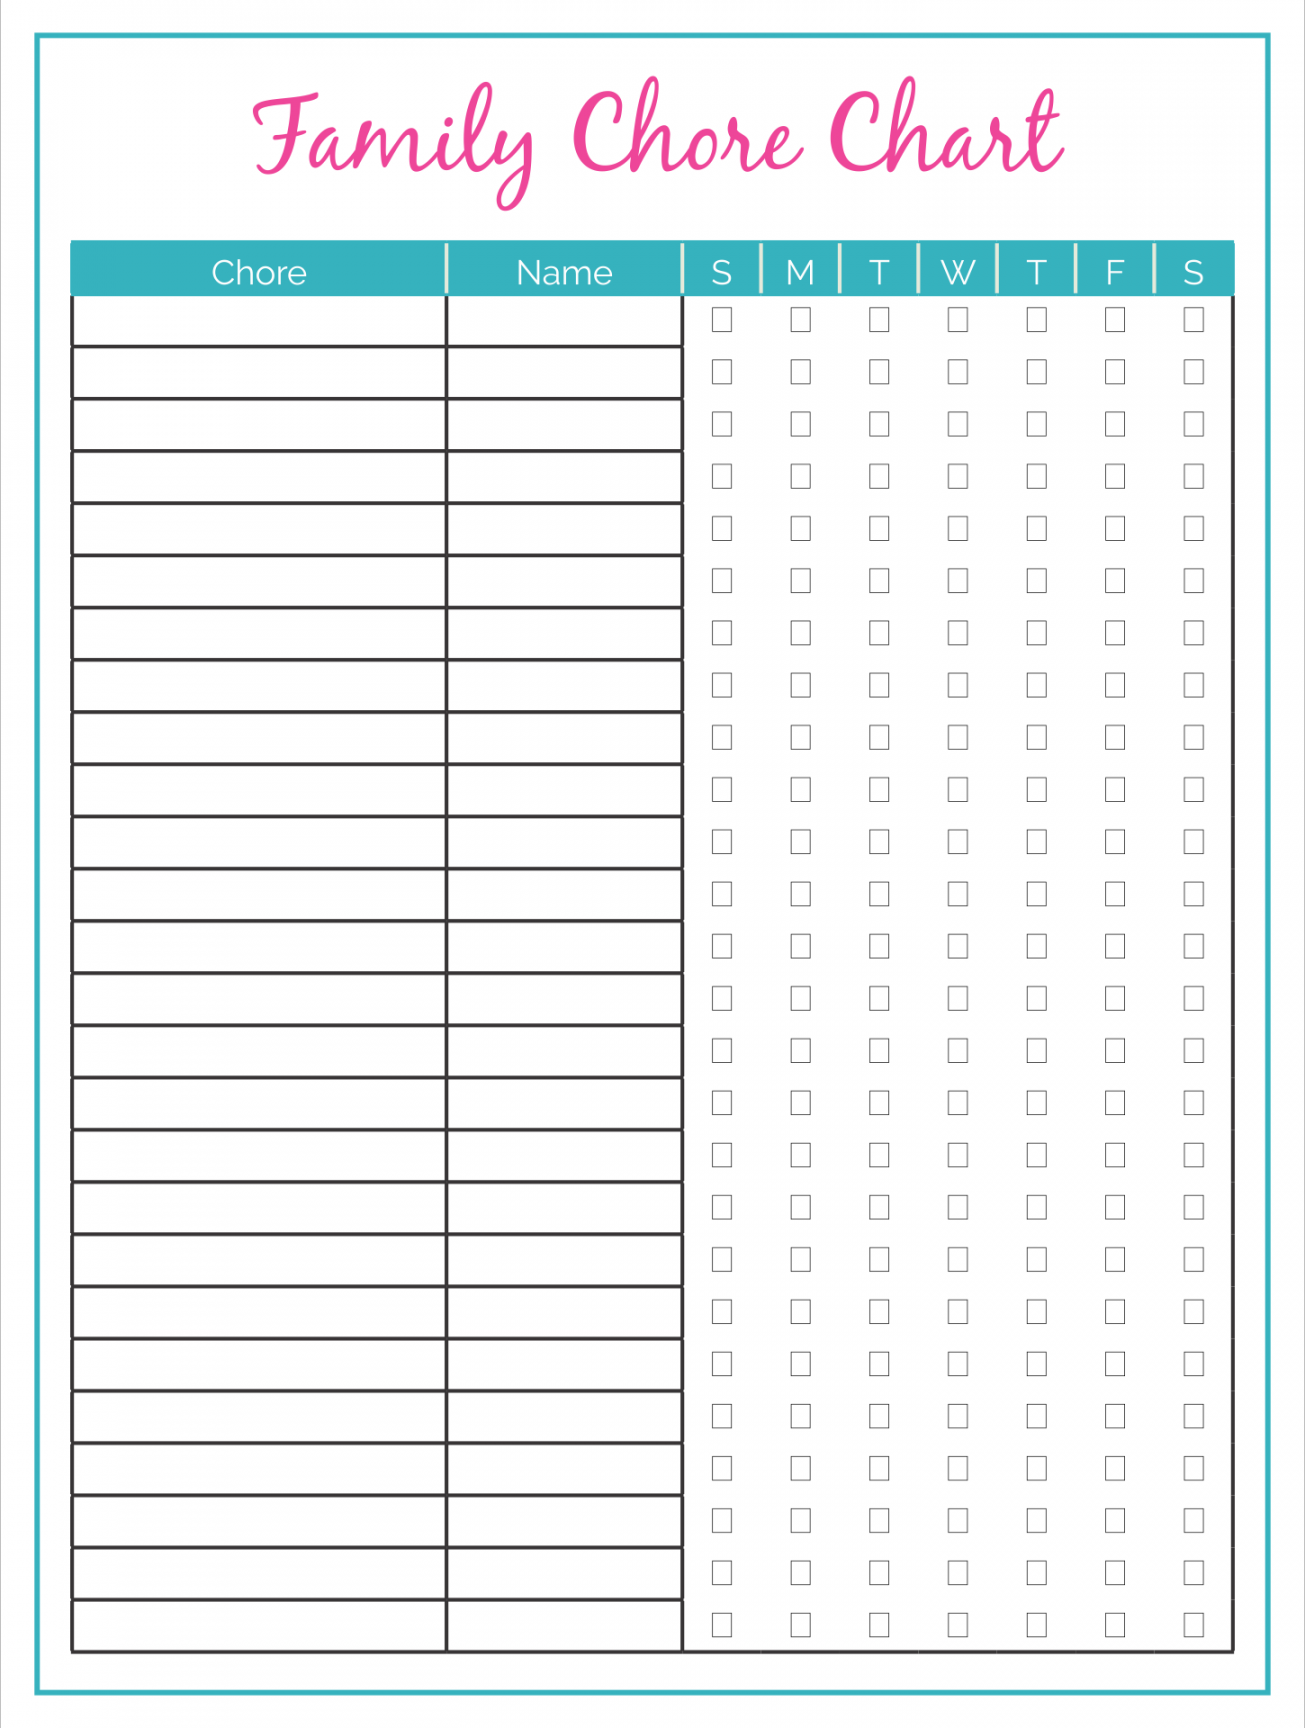 Best Free Printable Family Chore Charts - printablee - Free Printable Chore Charts For Family